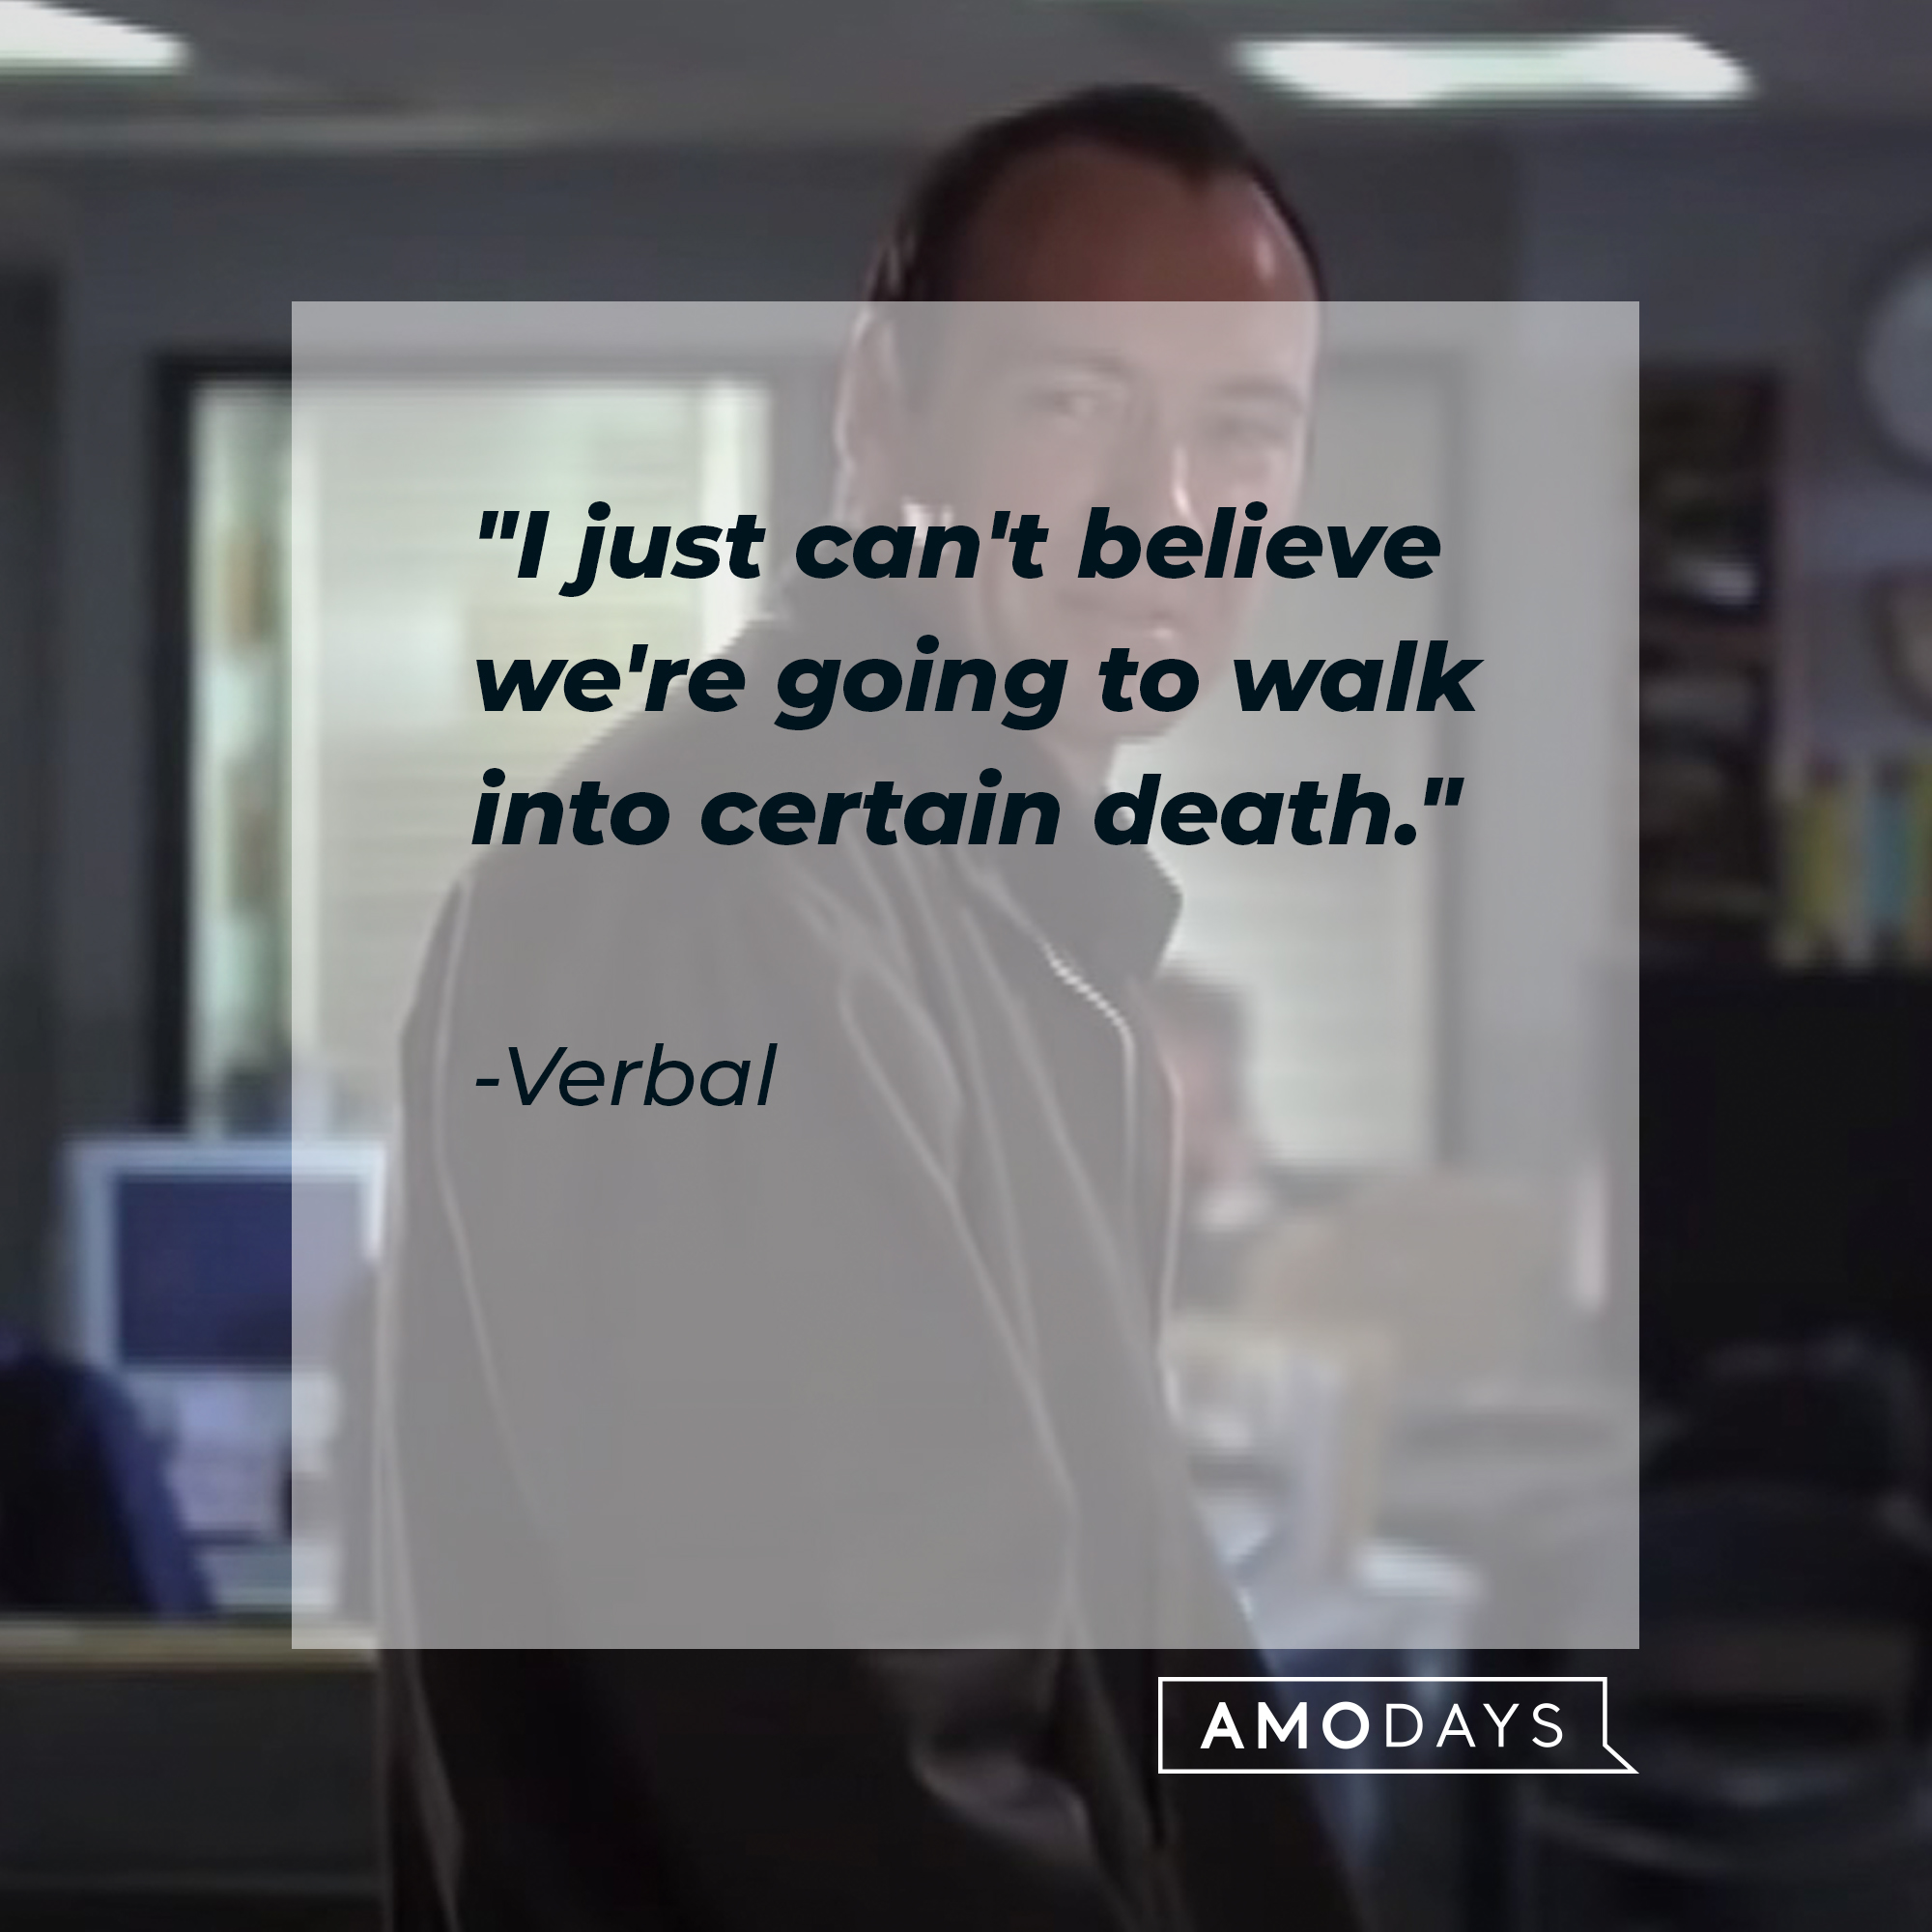 Verbal's quote: "I just can't believe we're going to walk into certain death." | Source: facebook.com/usualsuspectsmovie